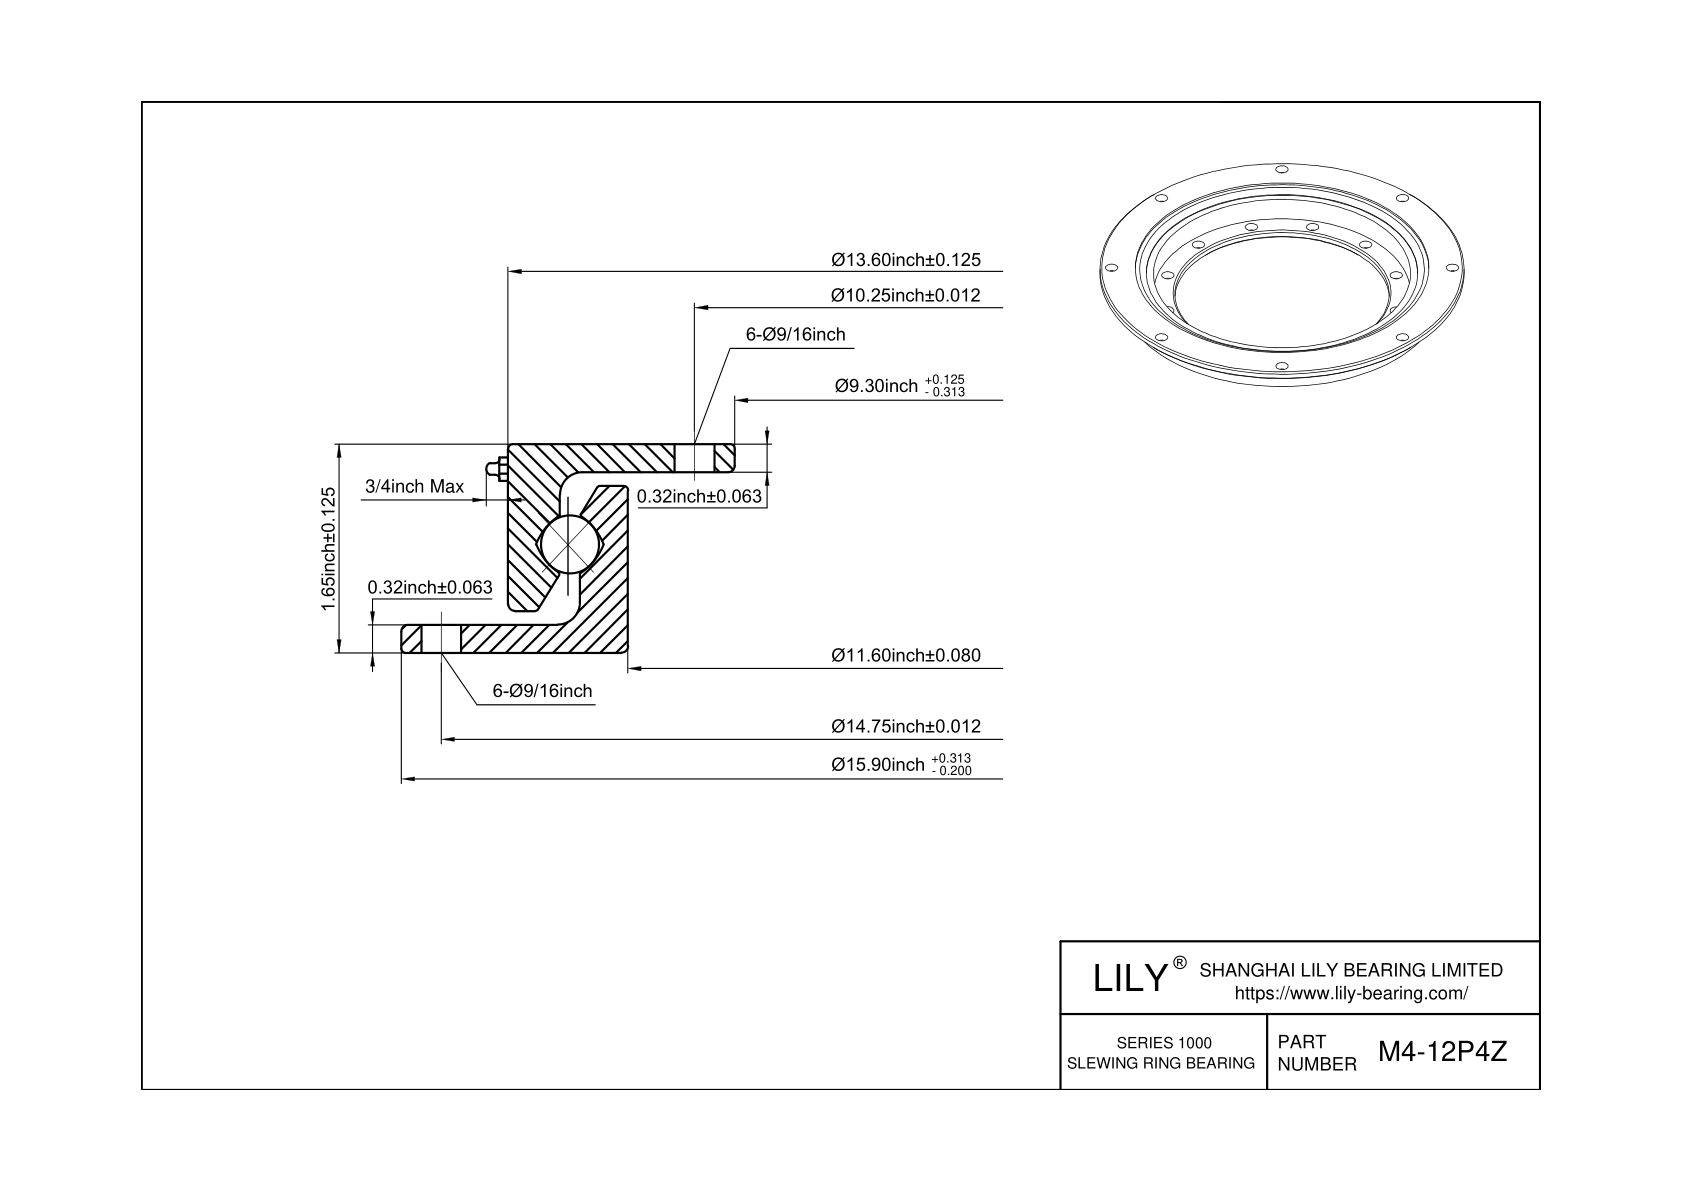 M4-12P4Z Developed For Use In Transport Vehicles cad drawing